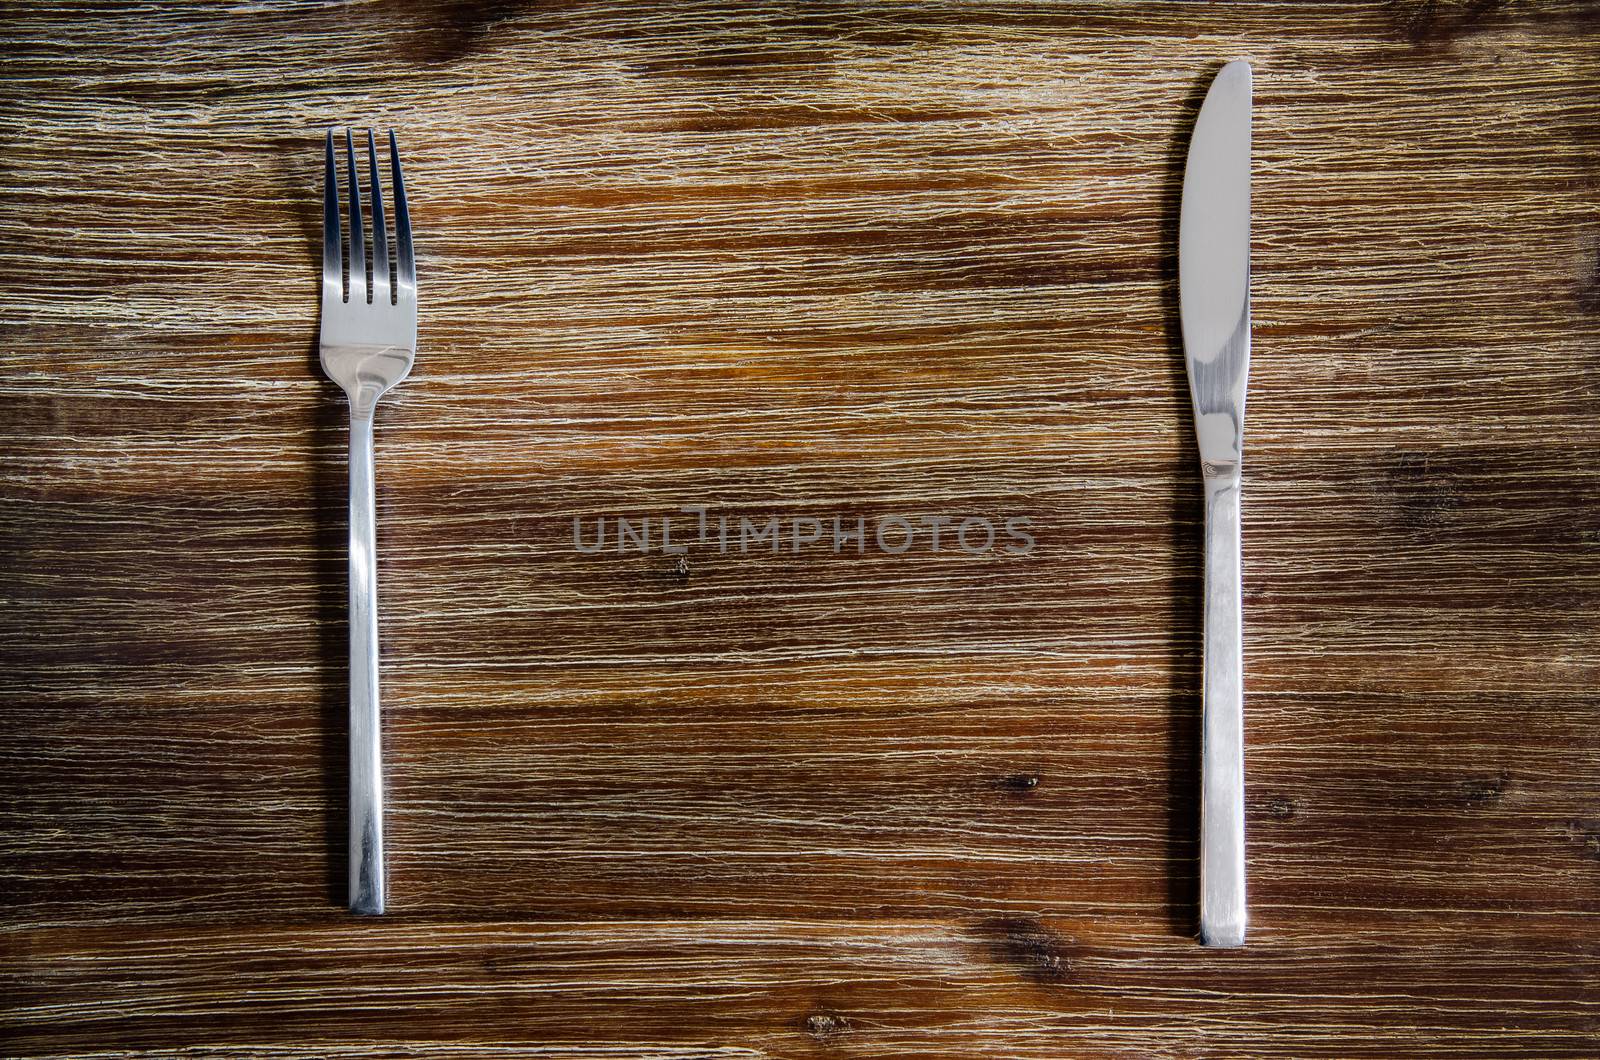 Knife and fork set on a wooden table by martinm303